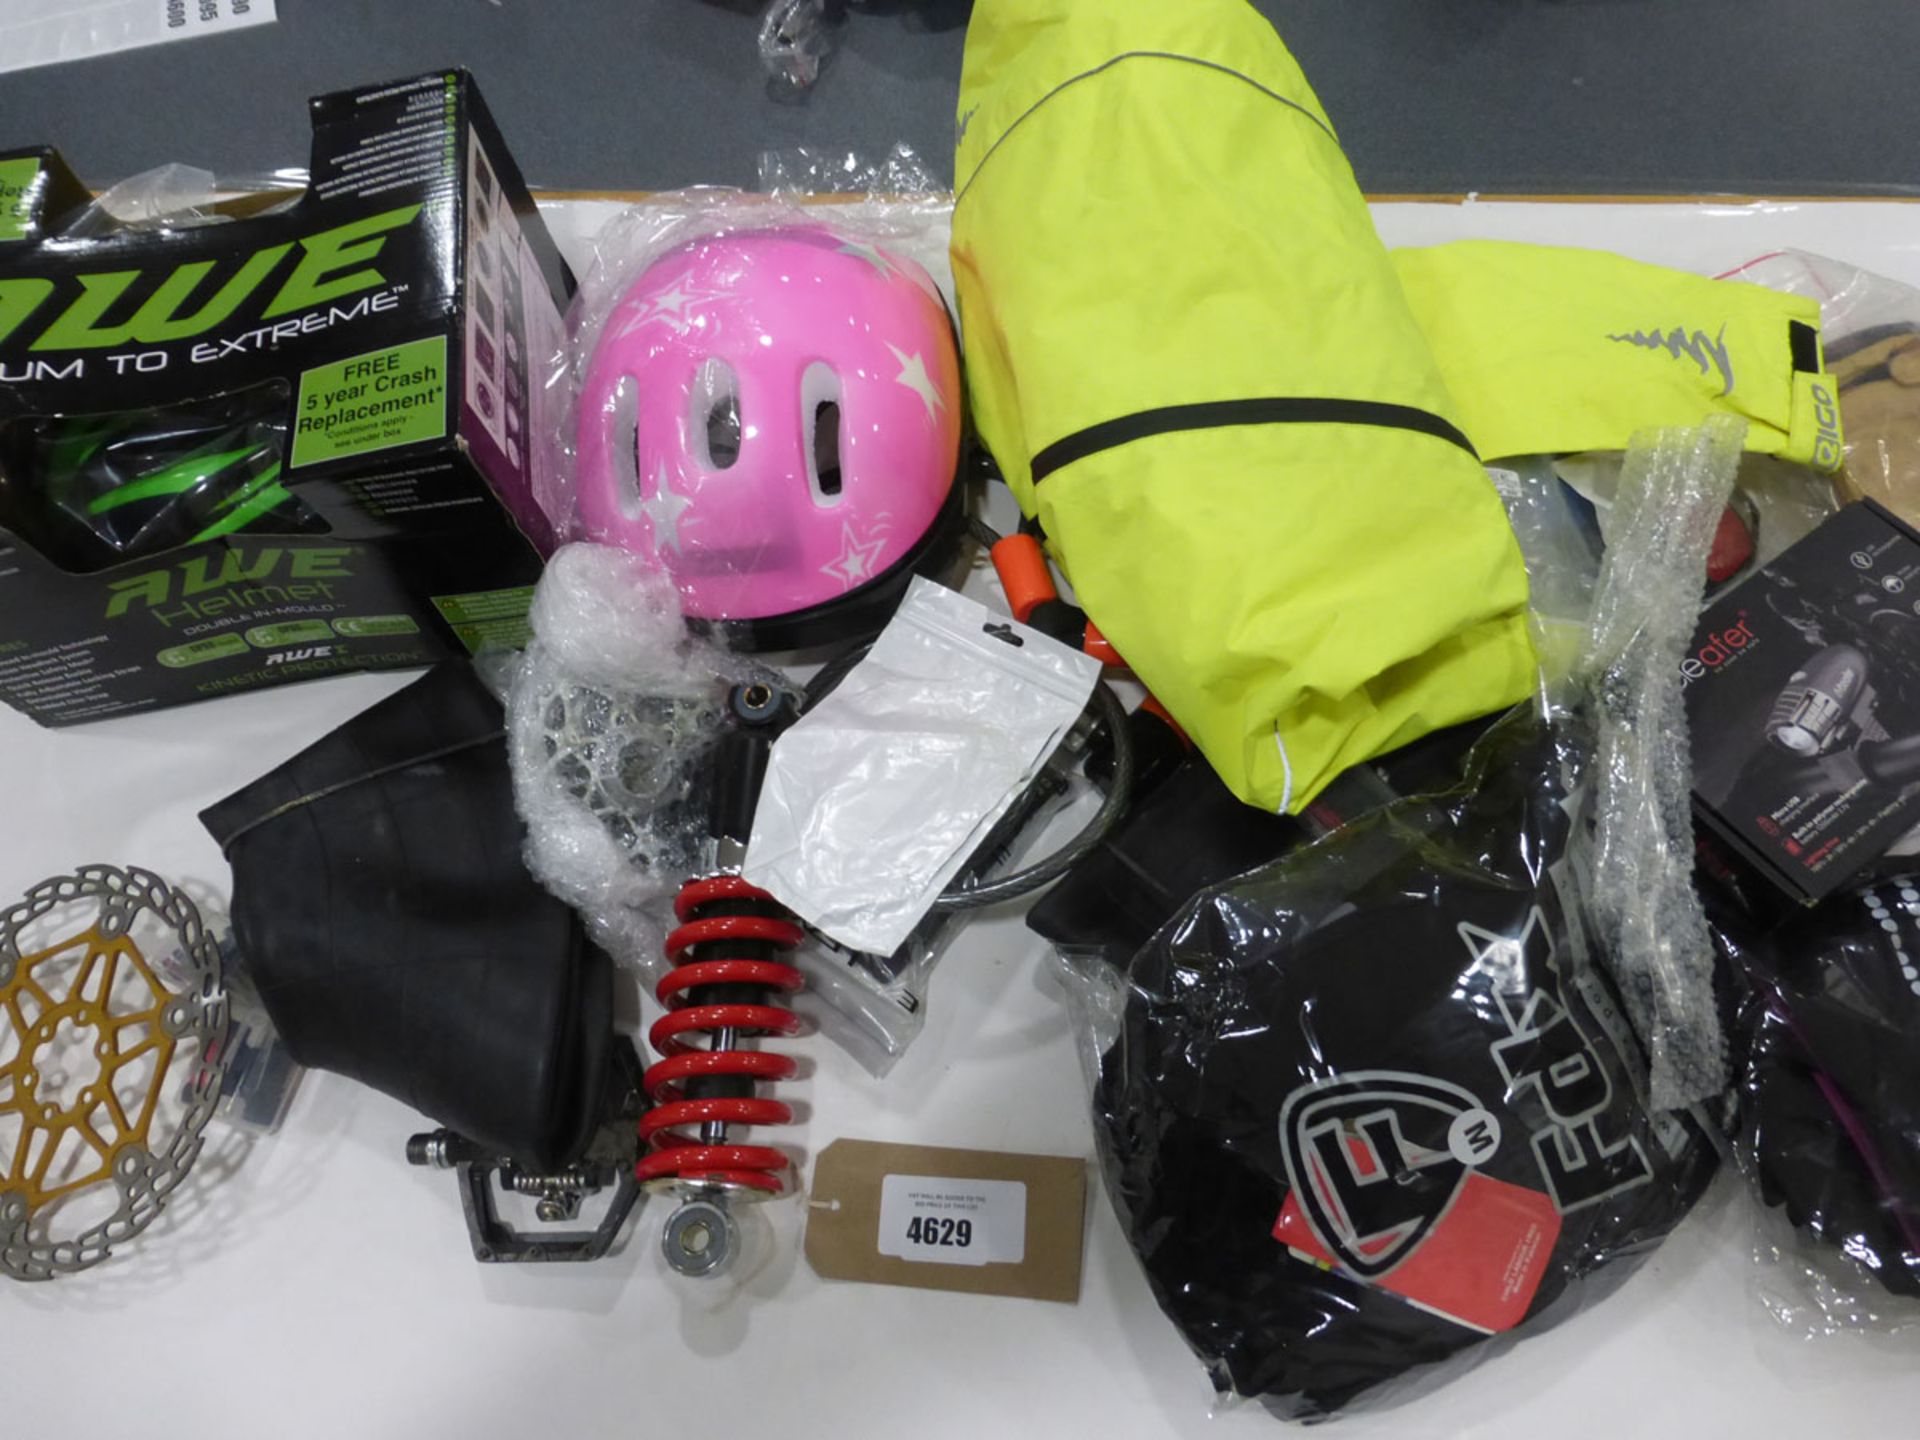 Bag containing motorbike parts incl. screens, shock absorbers, helmets, clothing, locks, lights,